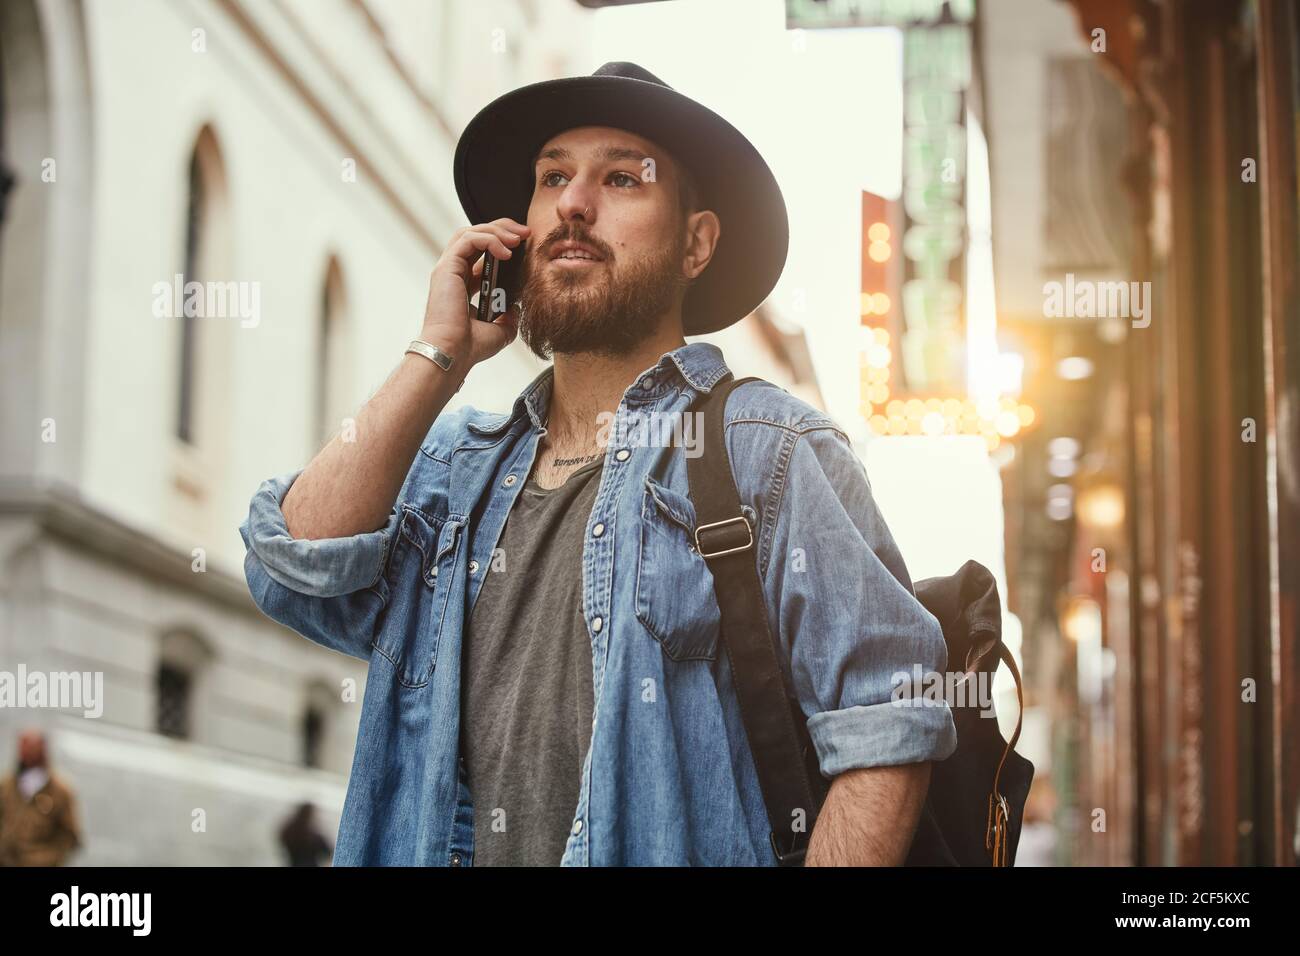 Young bearded handsome man in black hat and denim jacket merrily talking on mobile phone in street Stock Photo